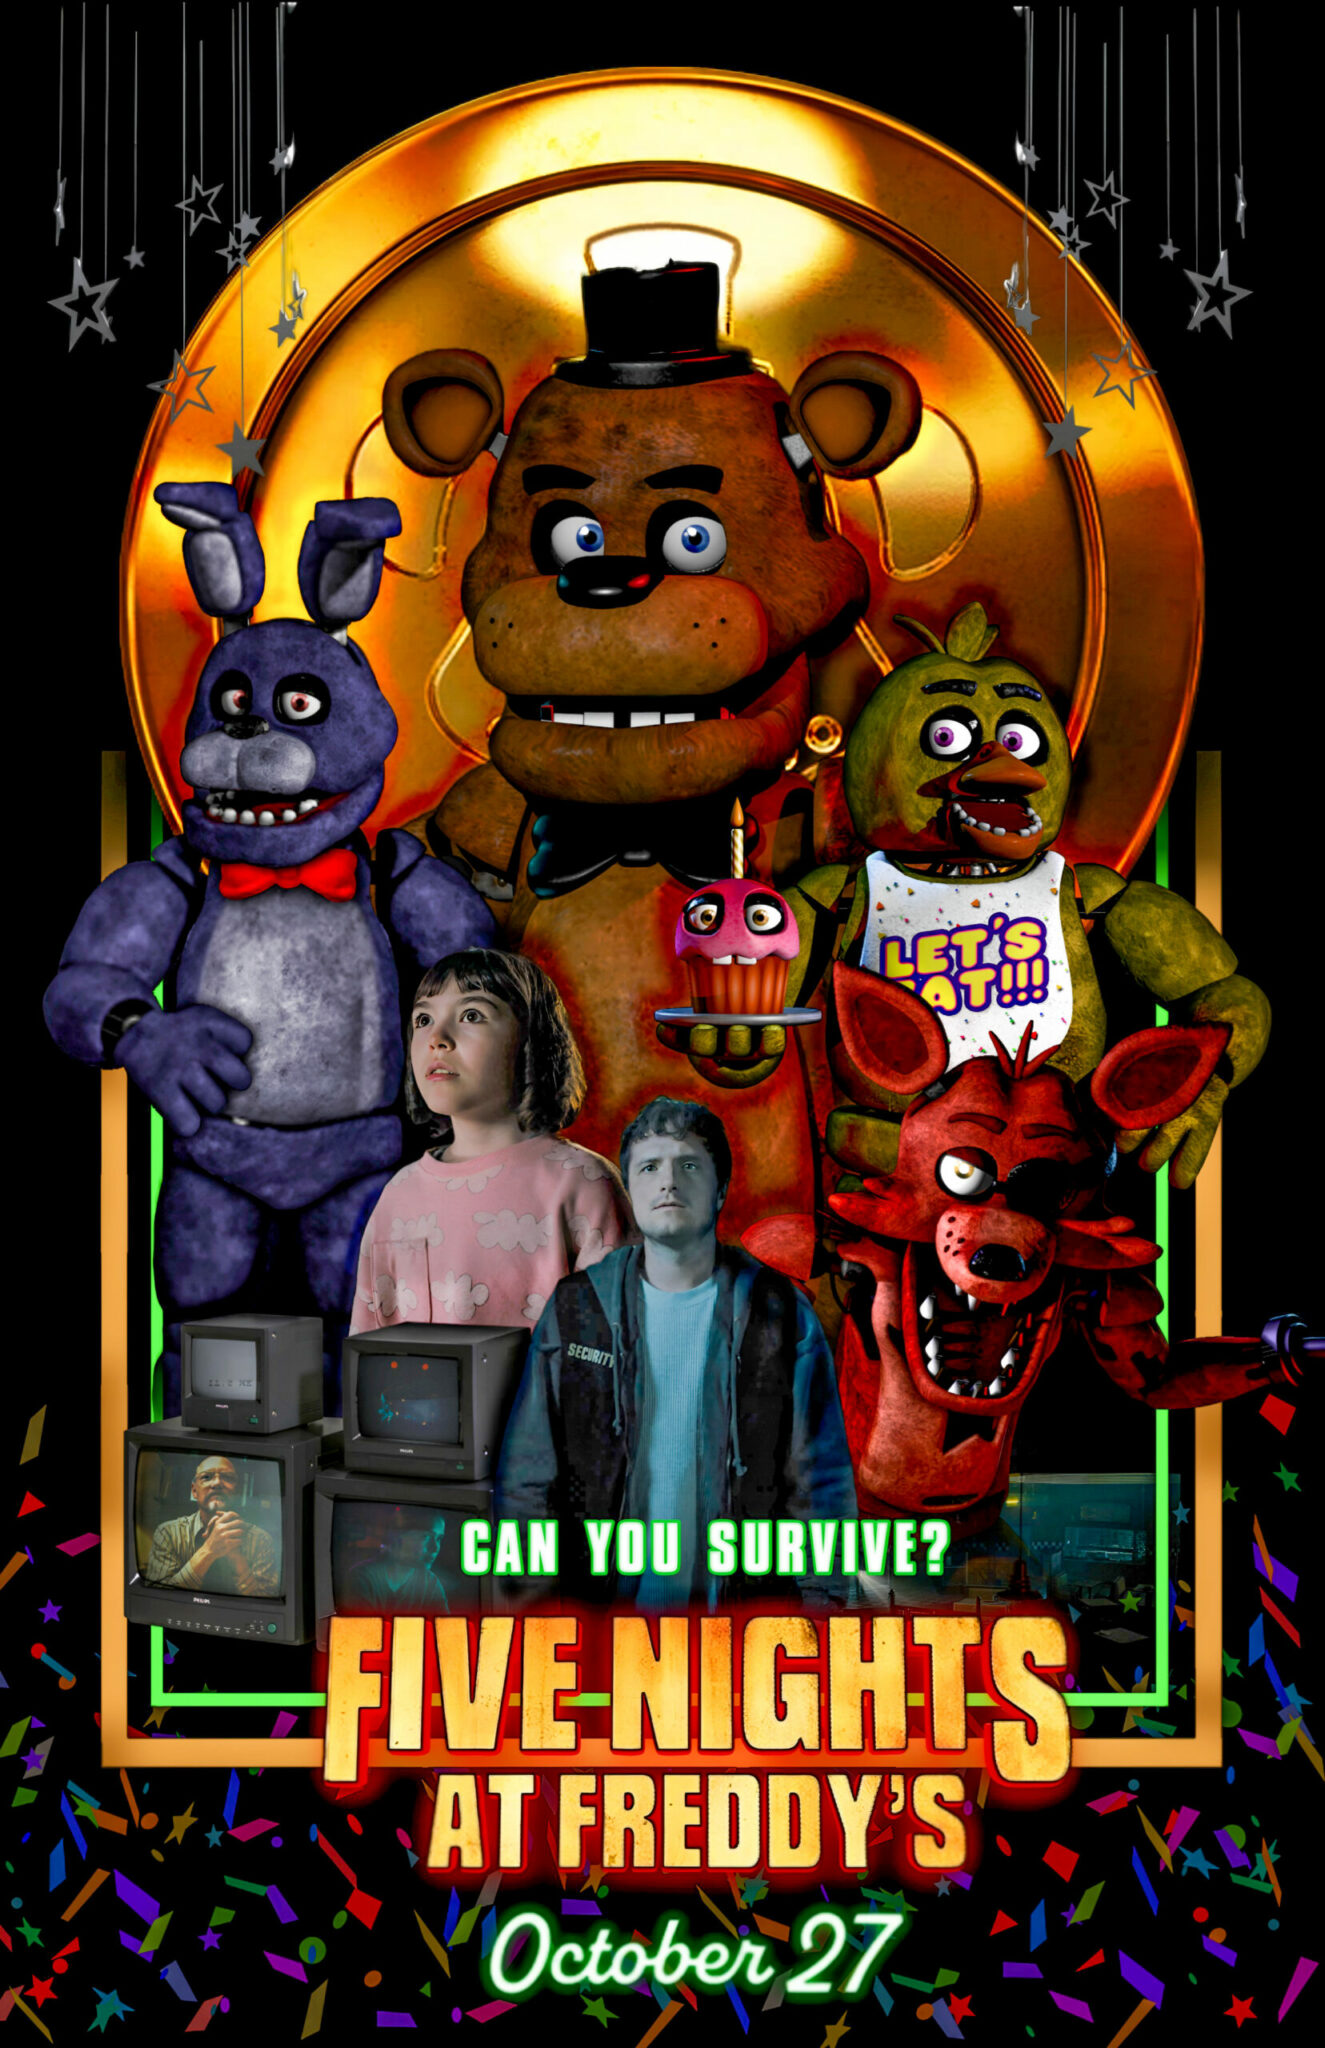 Five Nights At Freddy's: Movie - Poster., ThatPosterGuy